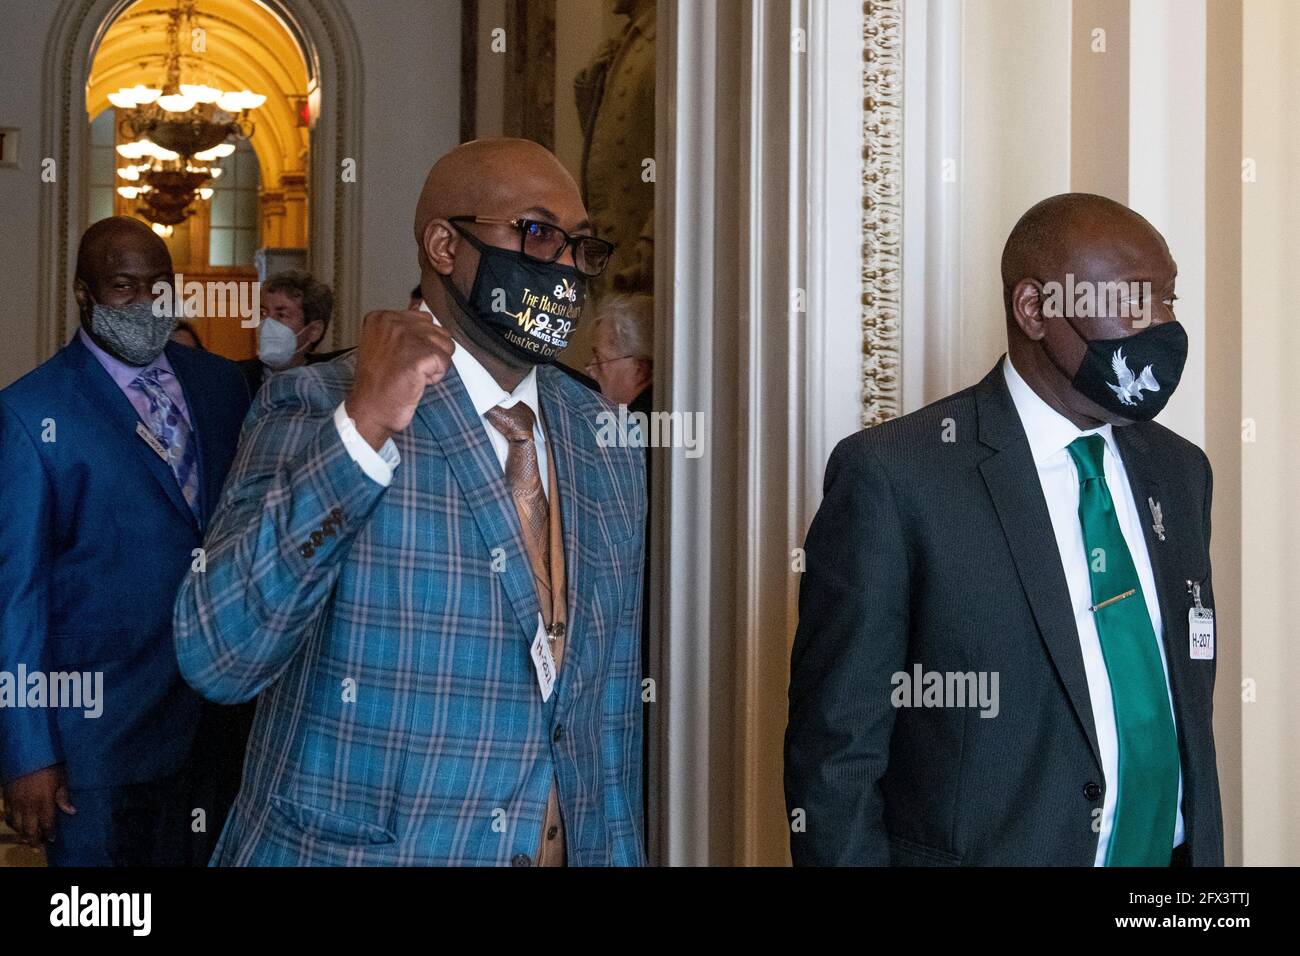 Philonise Floyd, the brother of George Floyd, left, and Attorney Benjamin Crump, right, are joined by members of George Floyd’s family as they arrive for a press conference with Speaker of the United States House of Representatives Nancy Pelosi (Democrat of California) at the US Capitol in Washington, DC, Tuesday, May 25, 2021. Credit: Rod Lamkey / CNP/Sipa USA Stock Photo